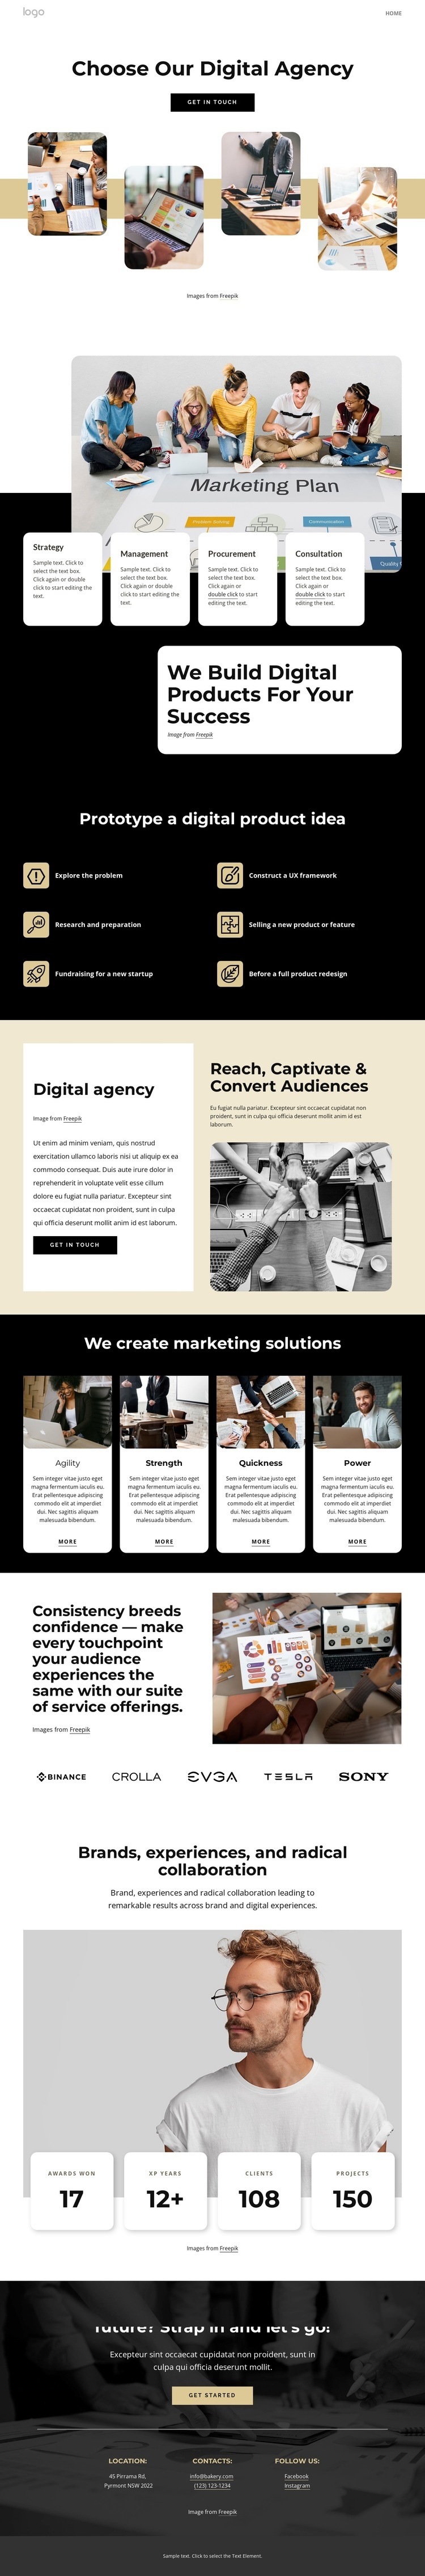 Choose our digital agency Wix Template Alternative